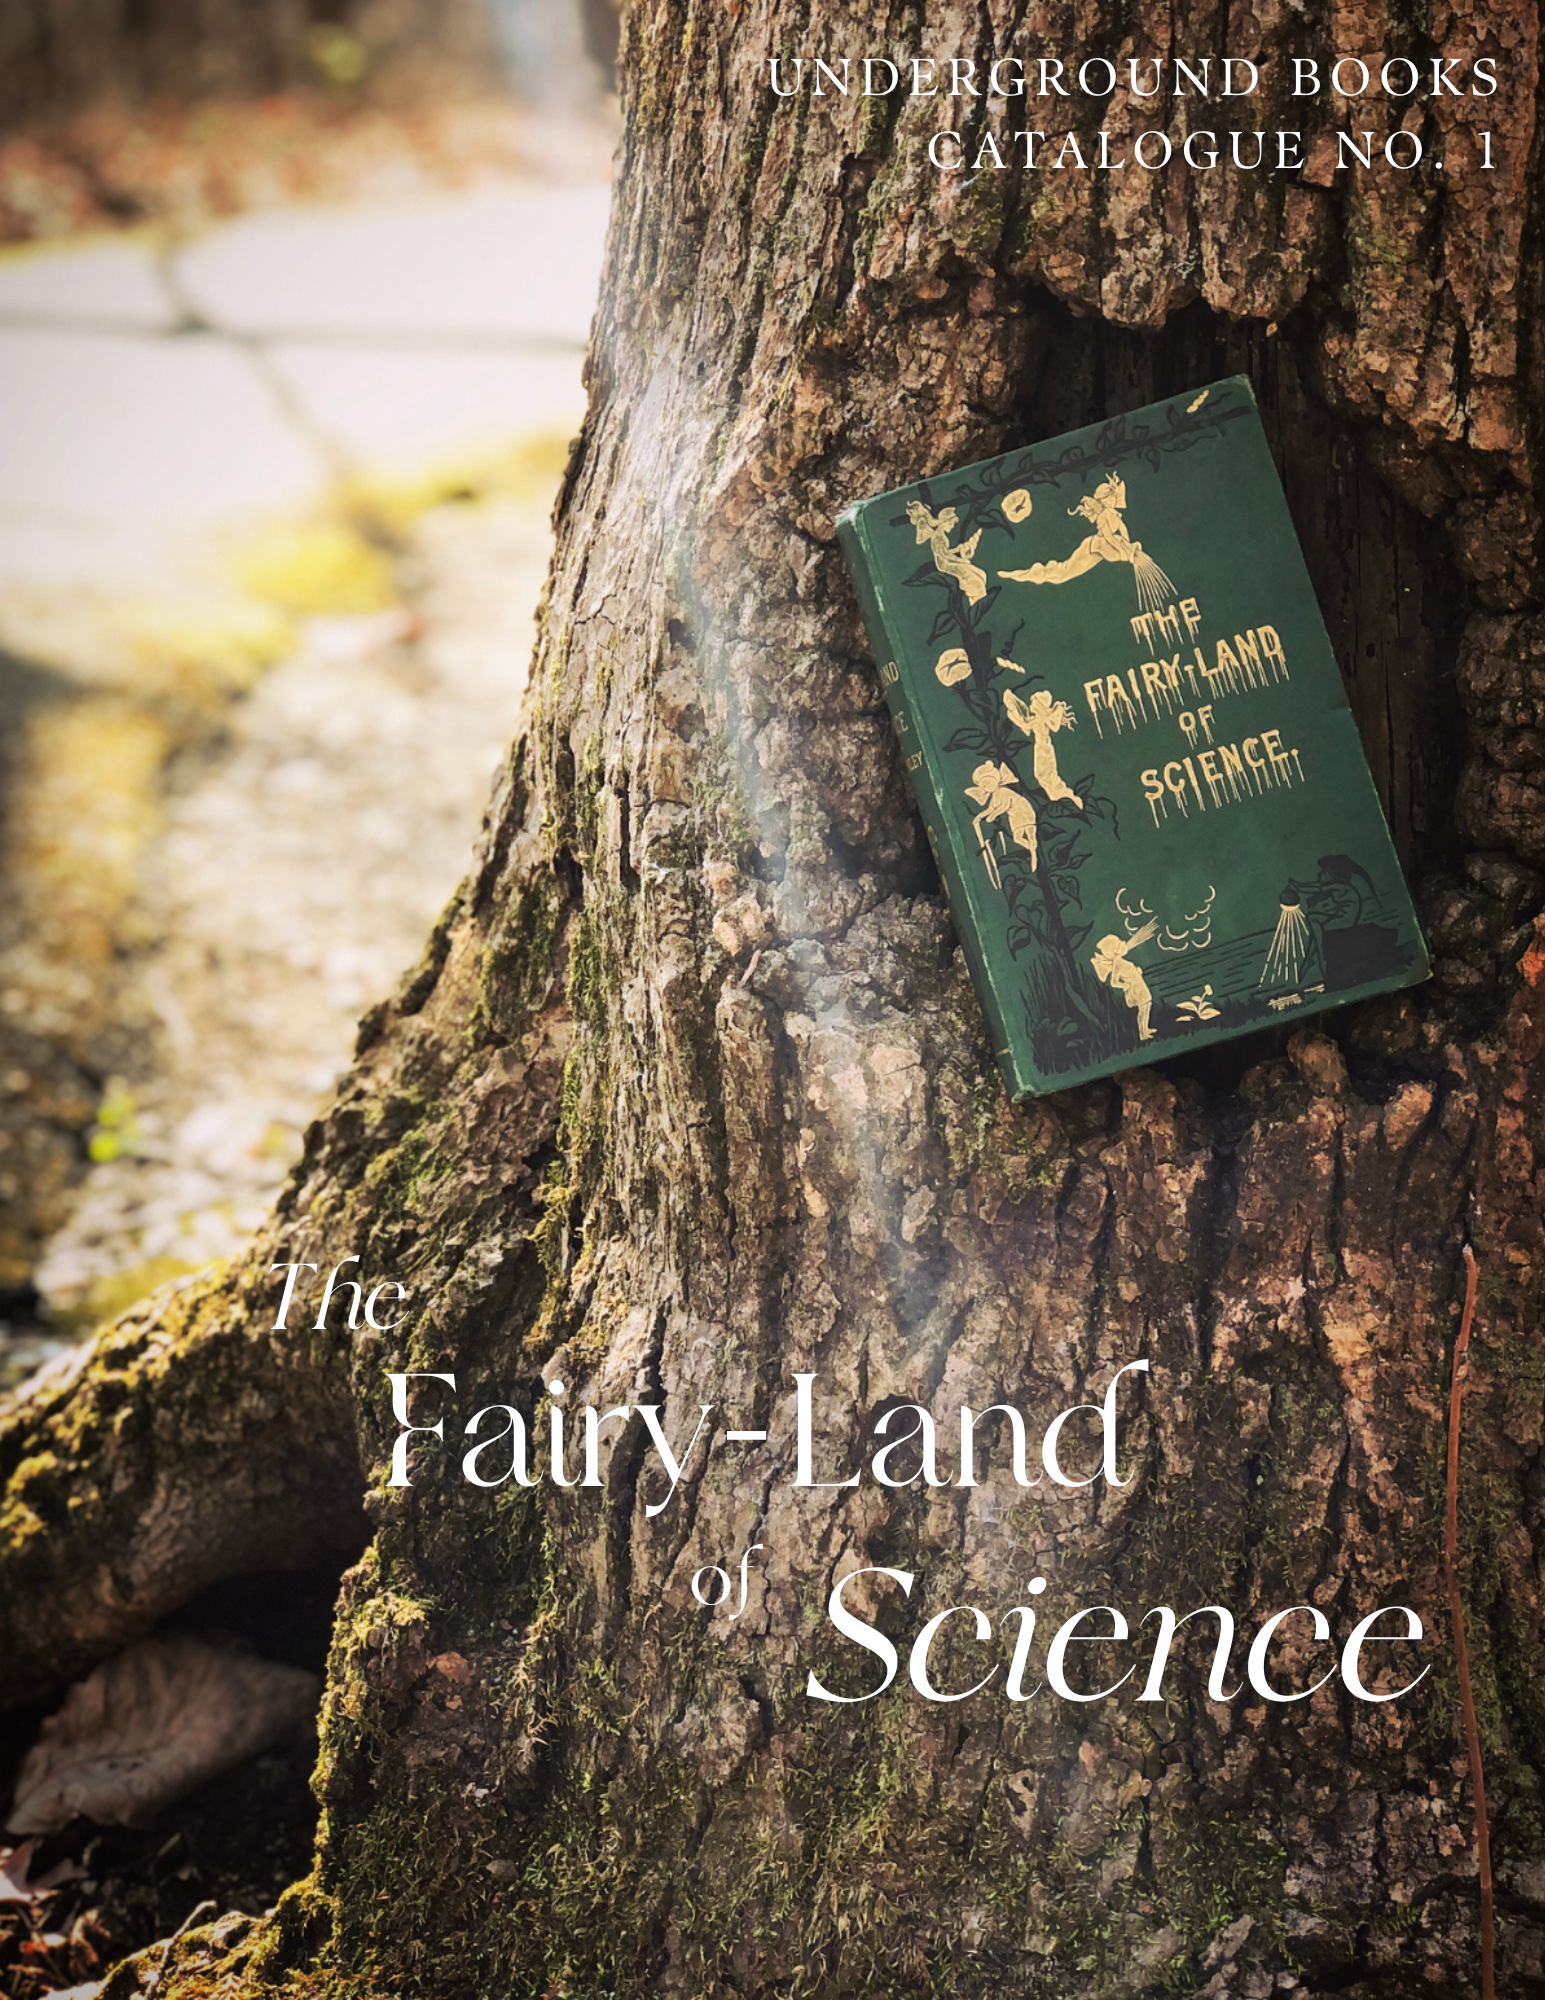 Catalog No. 1: The Fairy-Land of Science